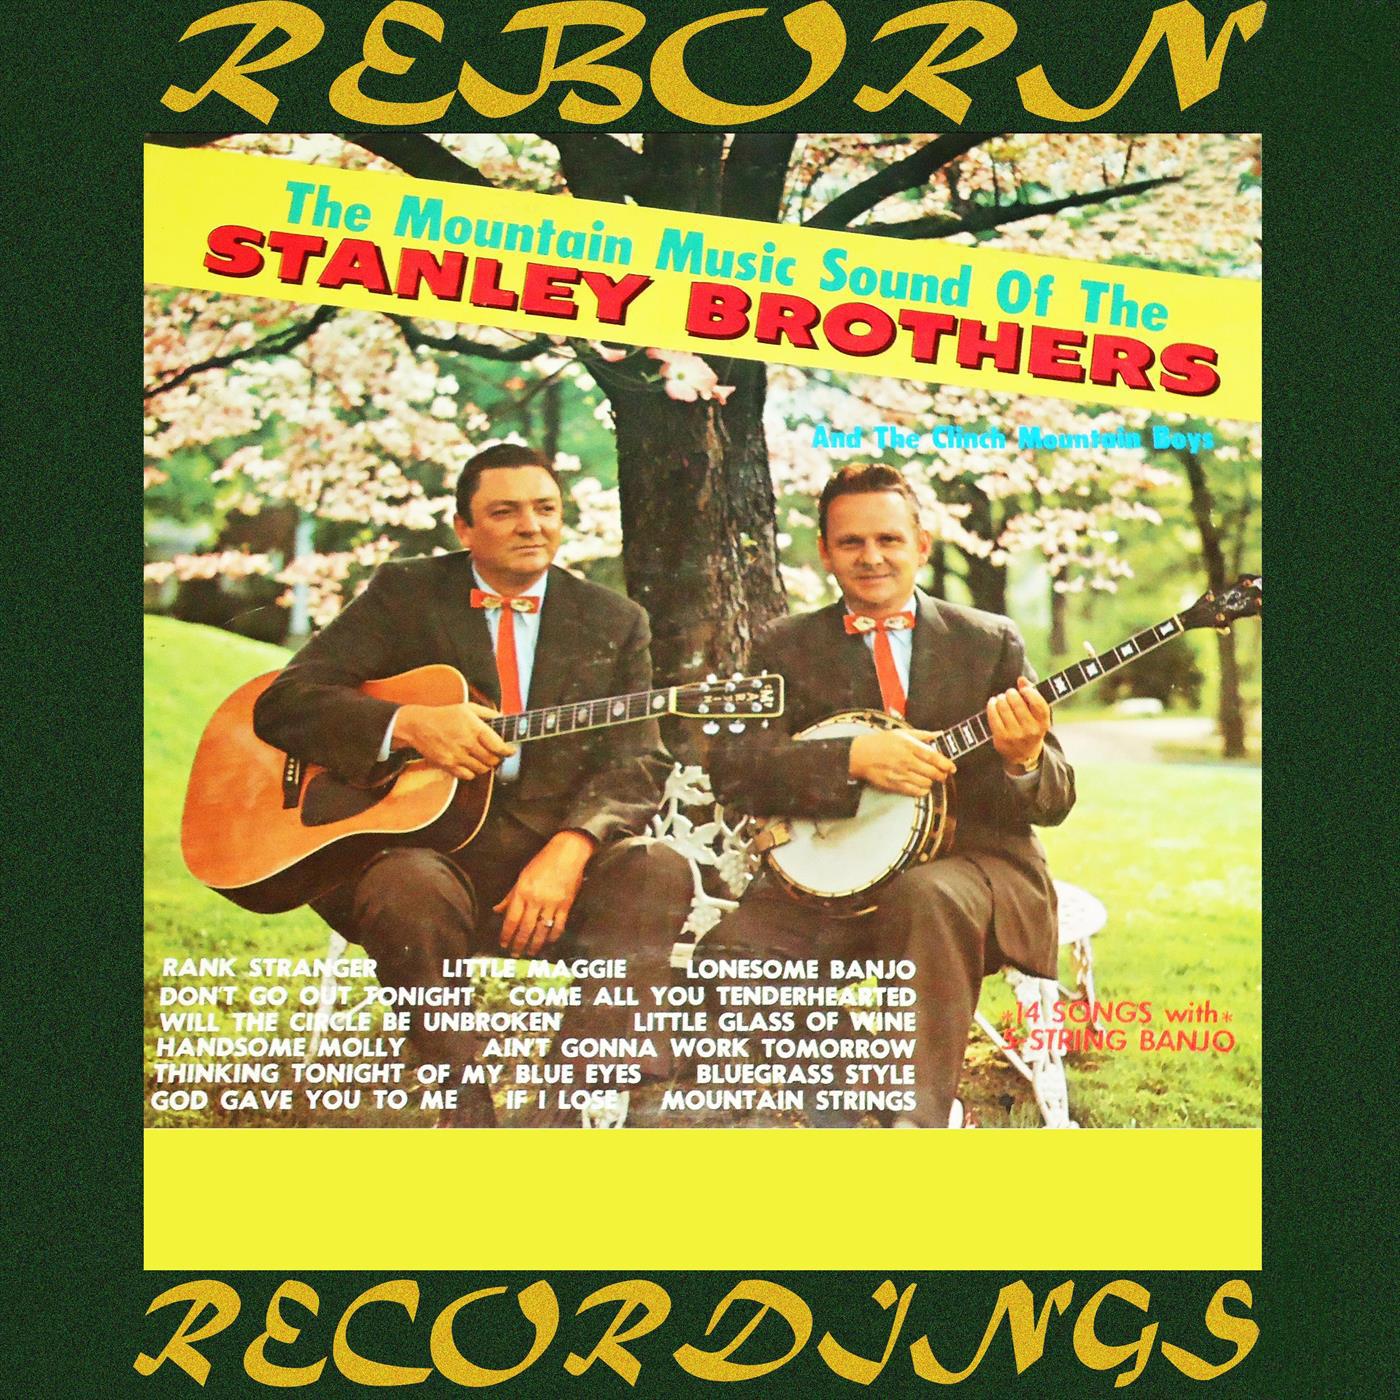 The Mountain Music Sound Of The Stanley Brothers (HD Remastered)